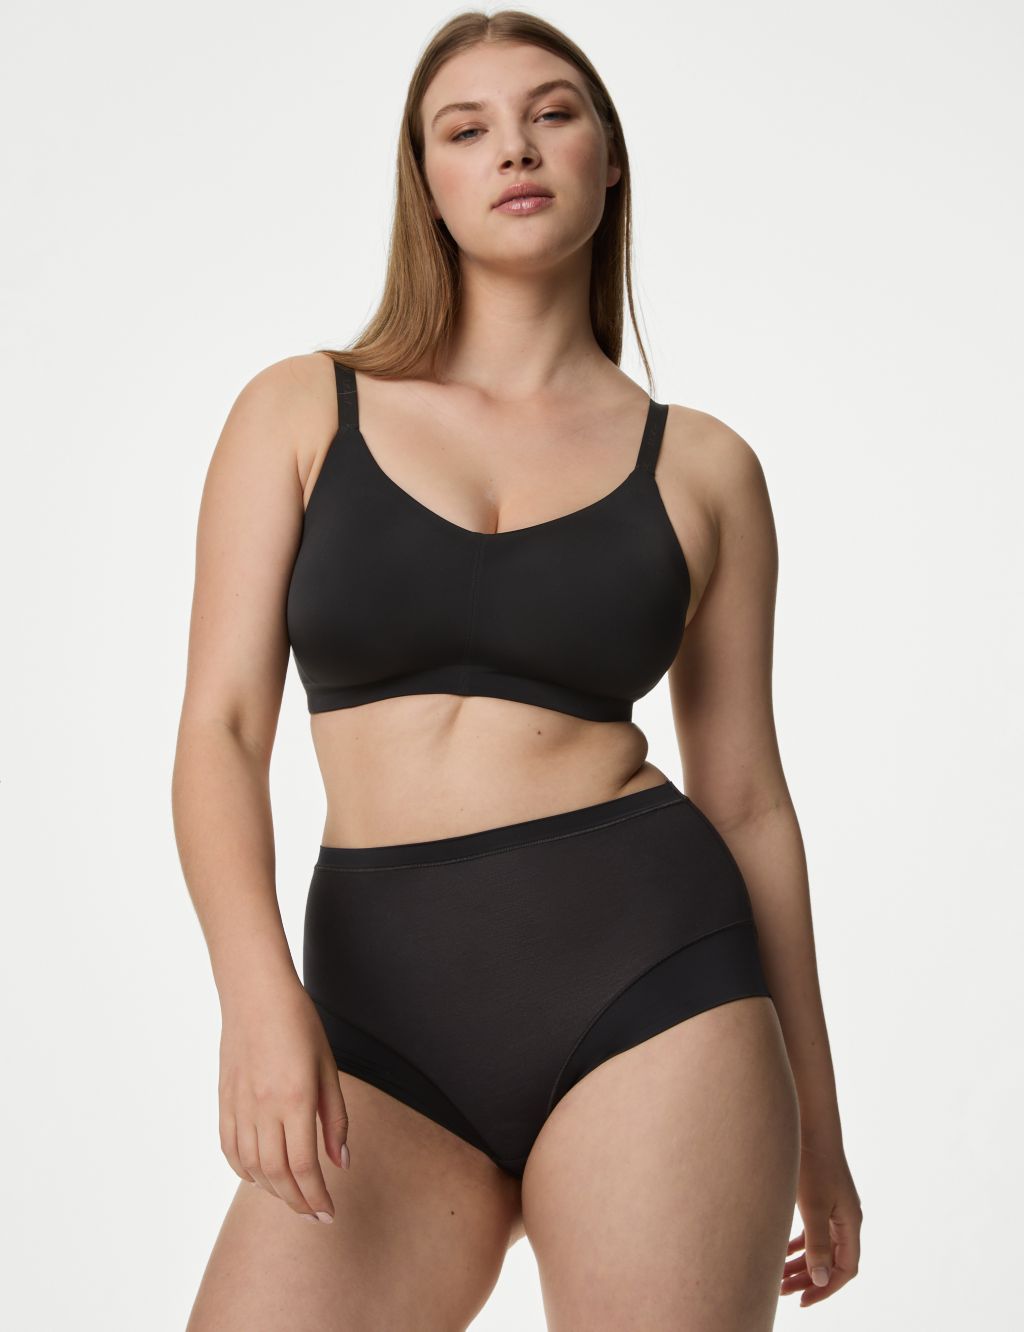 M&S BODY NON WIRED, SMOOTHING FULL CUP Bra with FLEXIFIT In ONYX Size 34B 